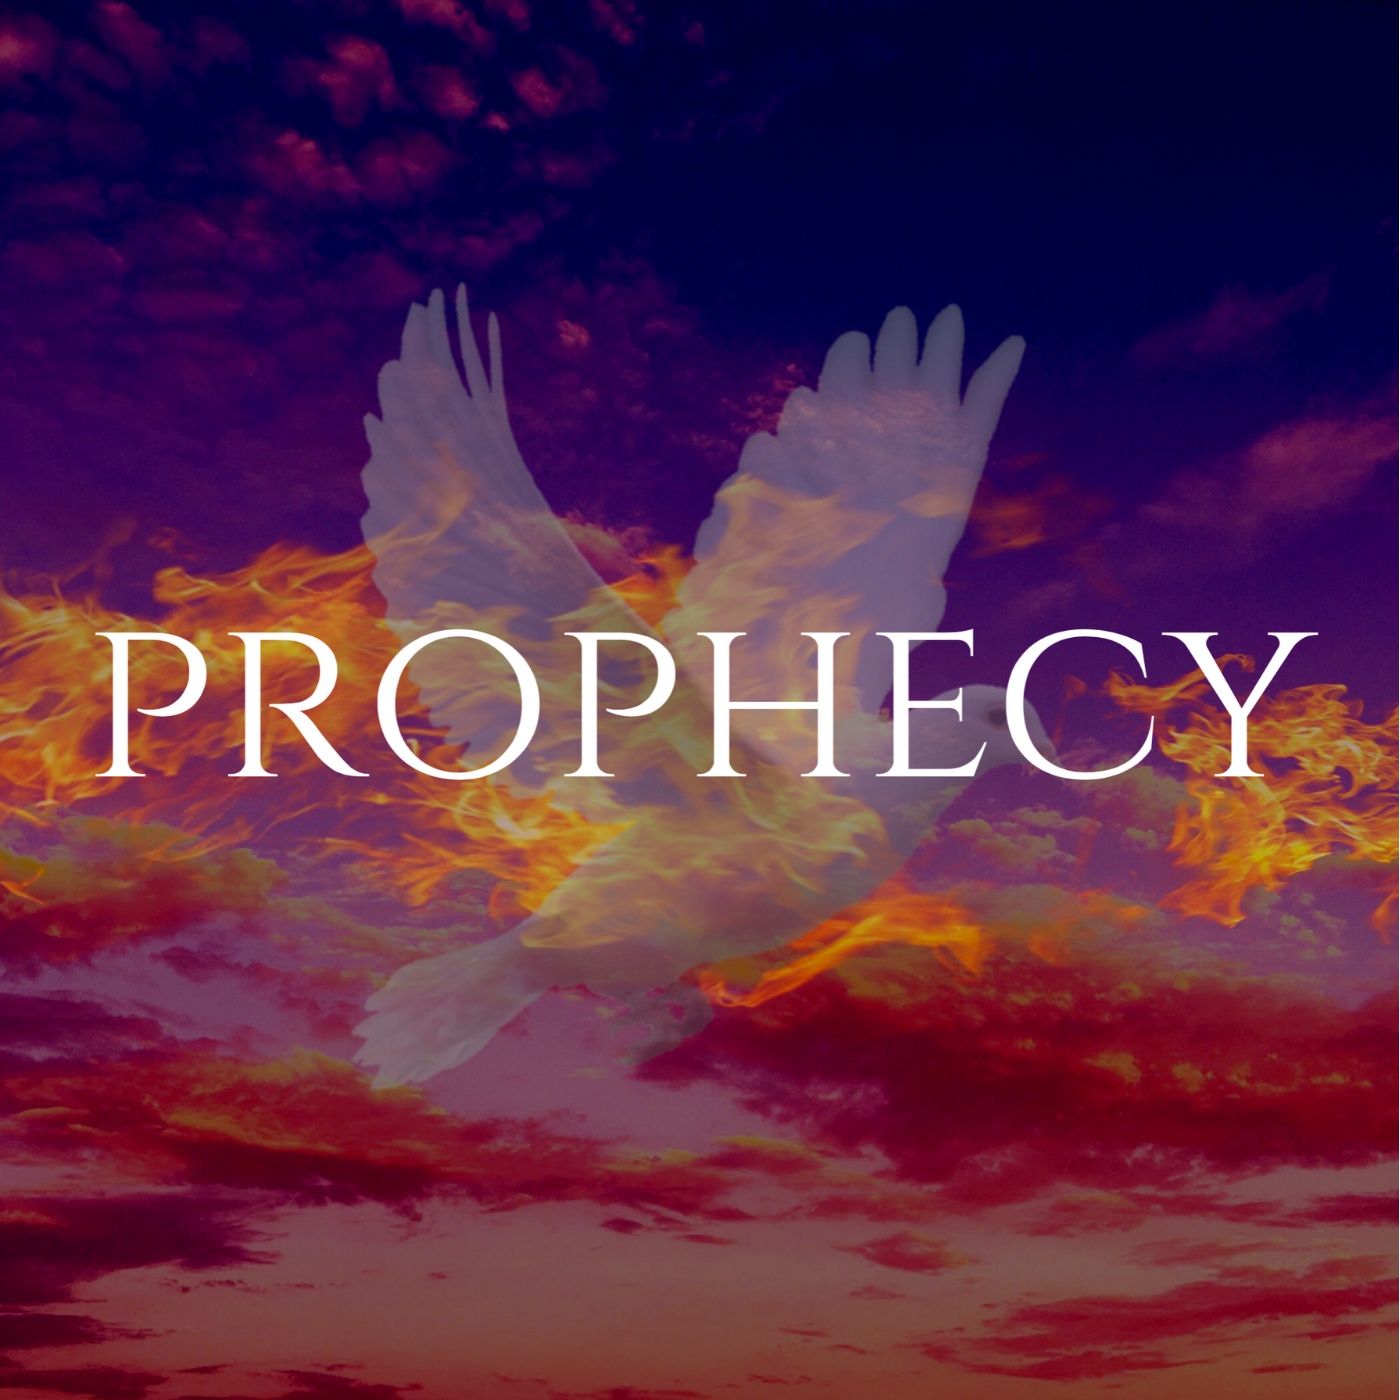 Prophecy: A Gift of The Holy Spirit